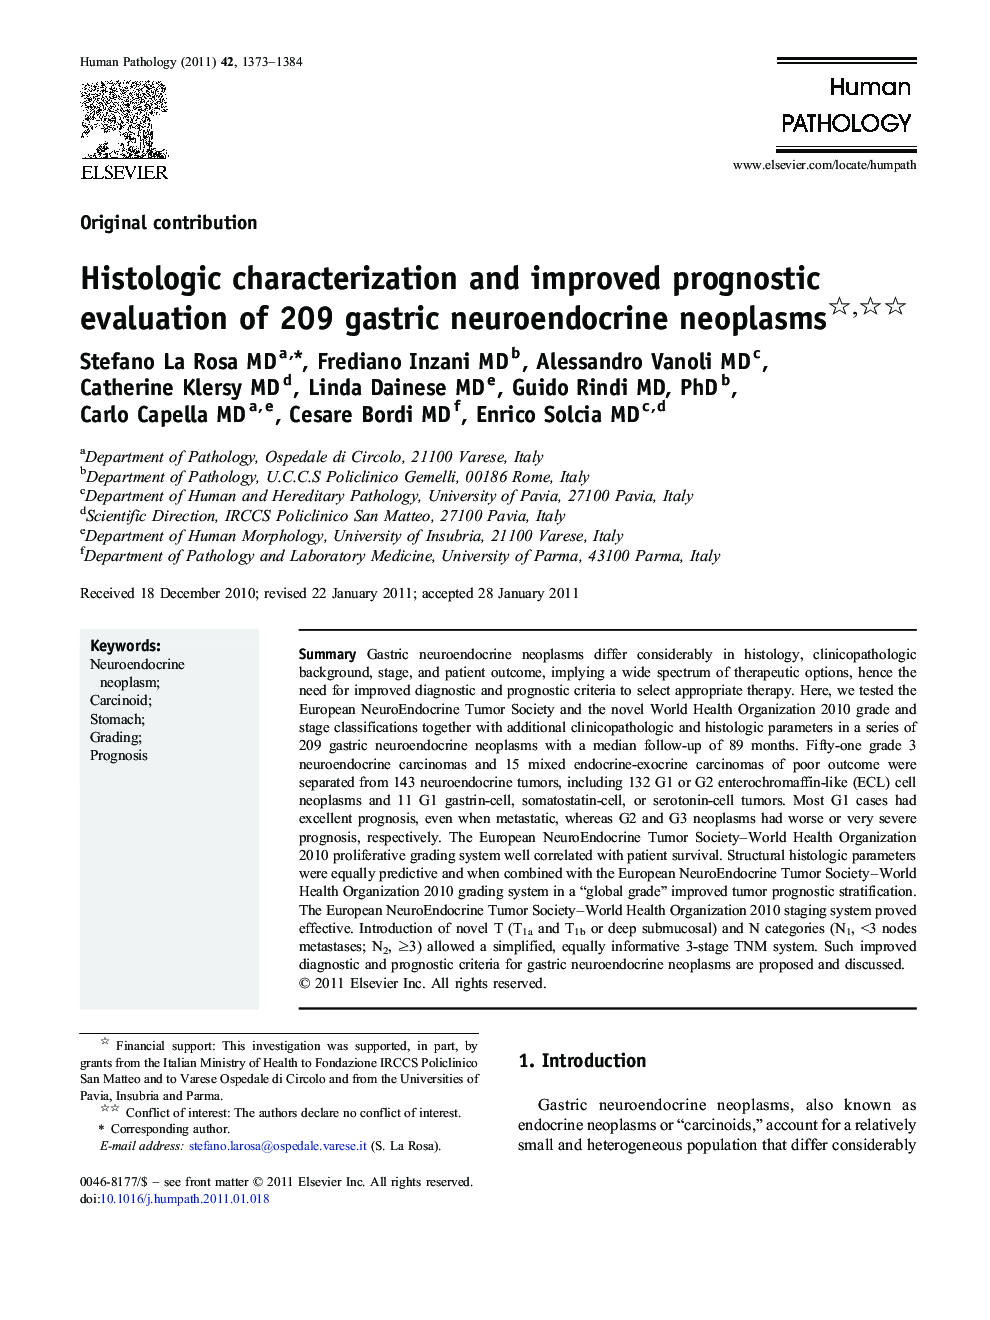 Histologic characterization and improved prognostic evaluation of 209 gastric neuroendocrine neoplasms 